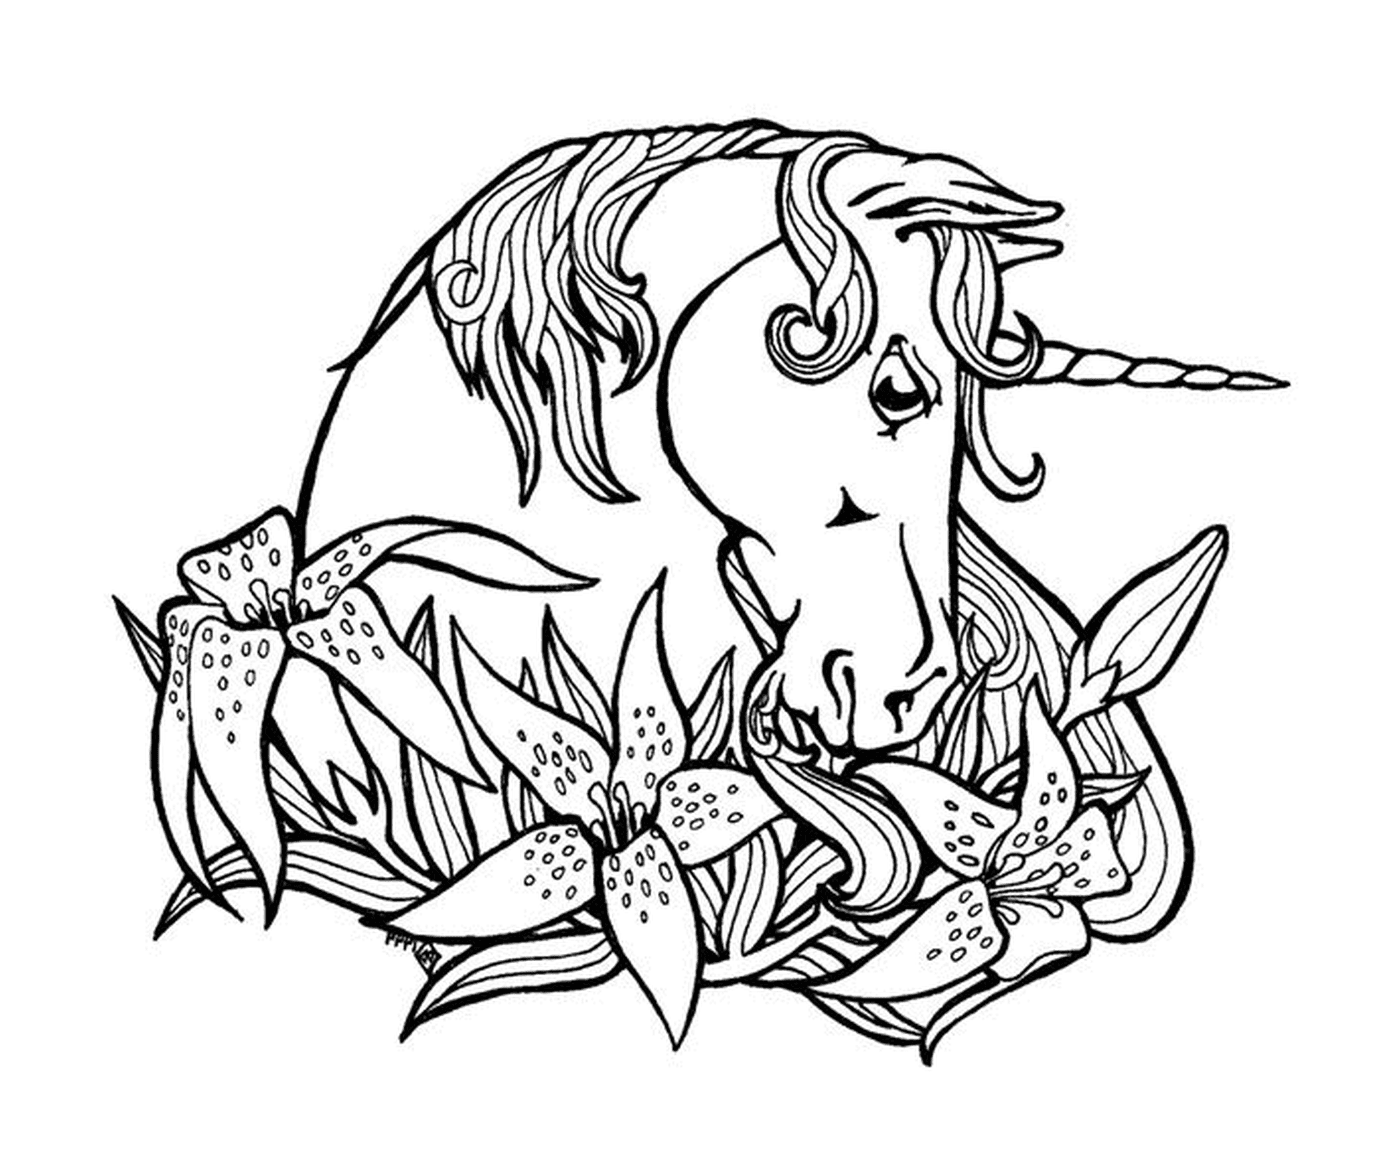  unicorn surrounded by a crown of flowers 